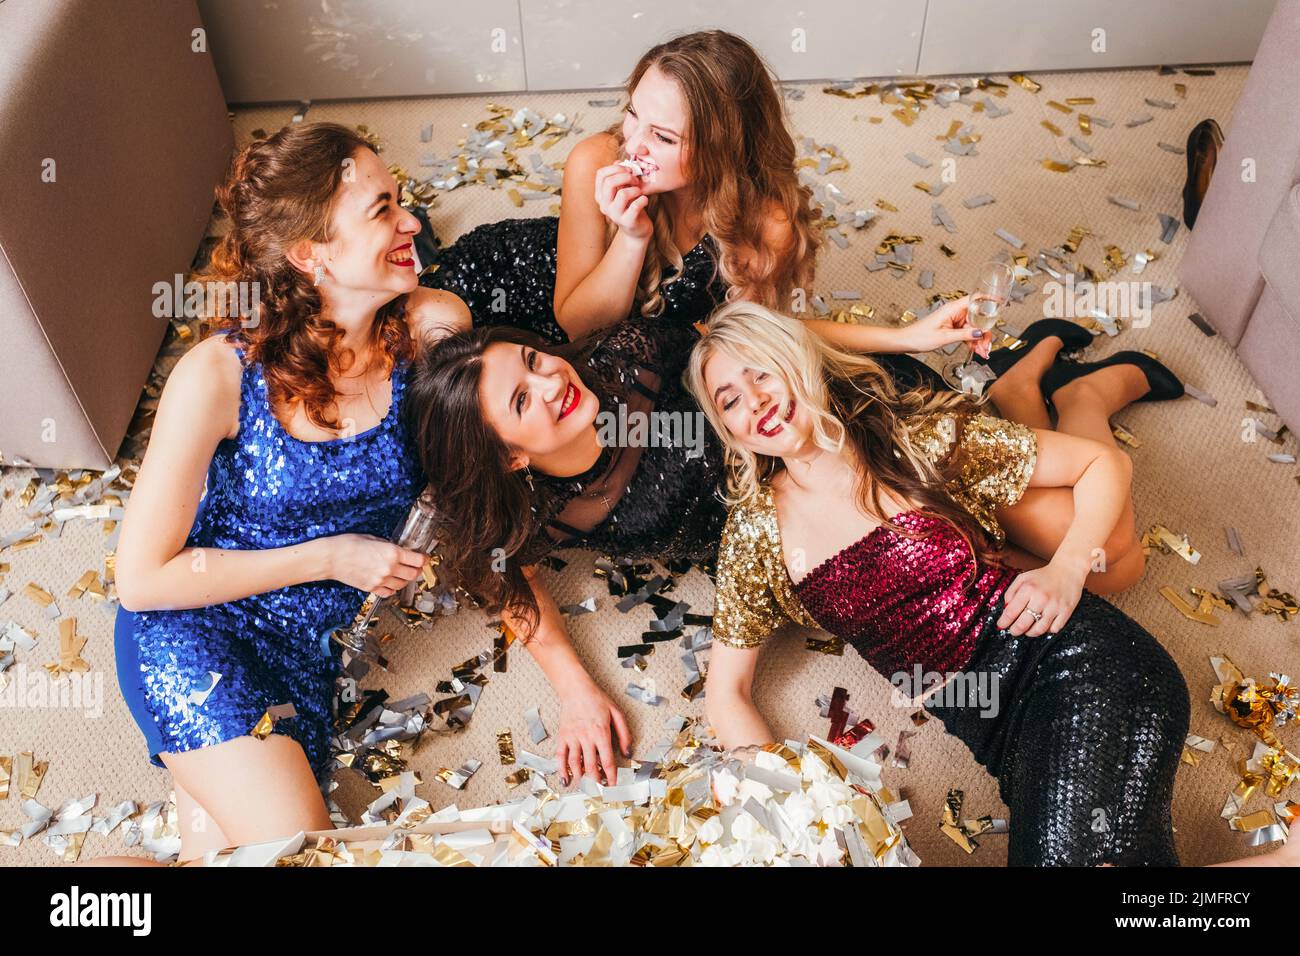 girls party celebration relaxed atmosphere Stock Photo